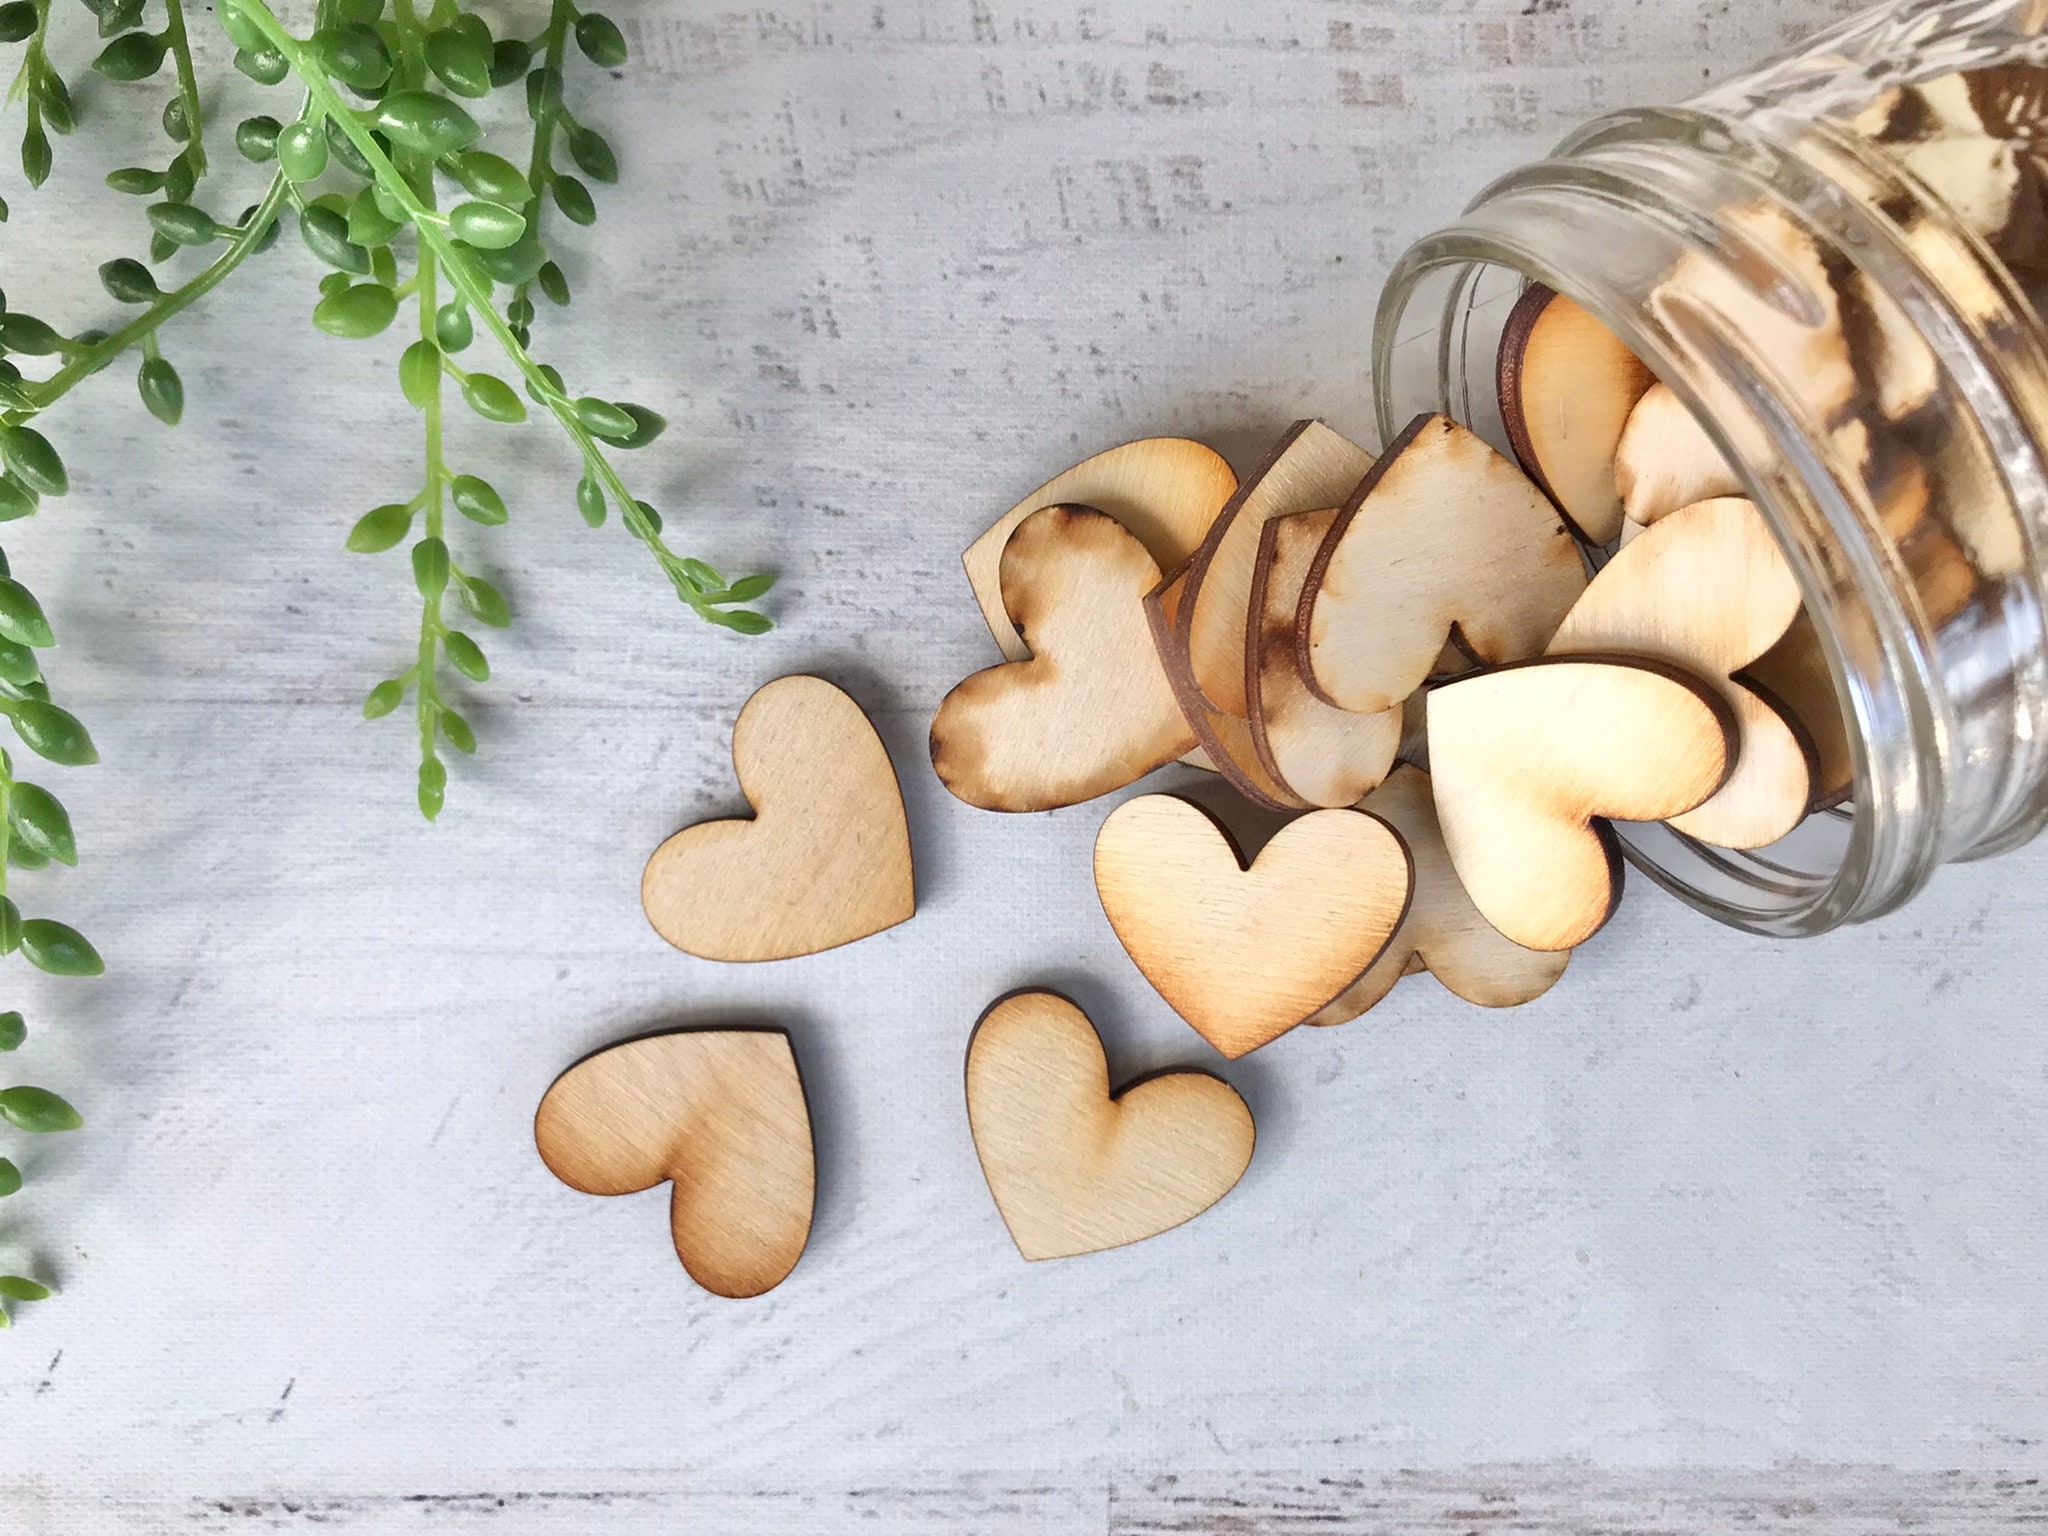 Wooden Hearts for Wedding Guest Book, Wooden Signing Hearts, 1 inch Unfinished Wood Heart Cut Outs for Crafts, Pack of 200, by Woodpeckers, Size: 1/8